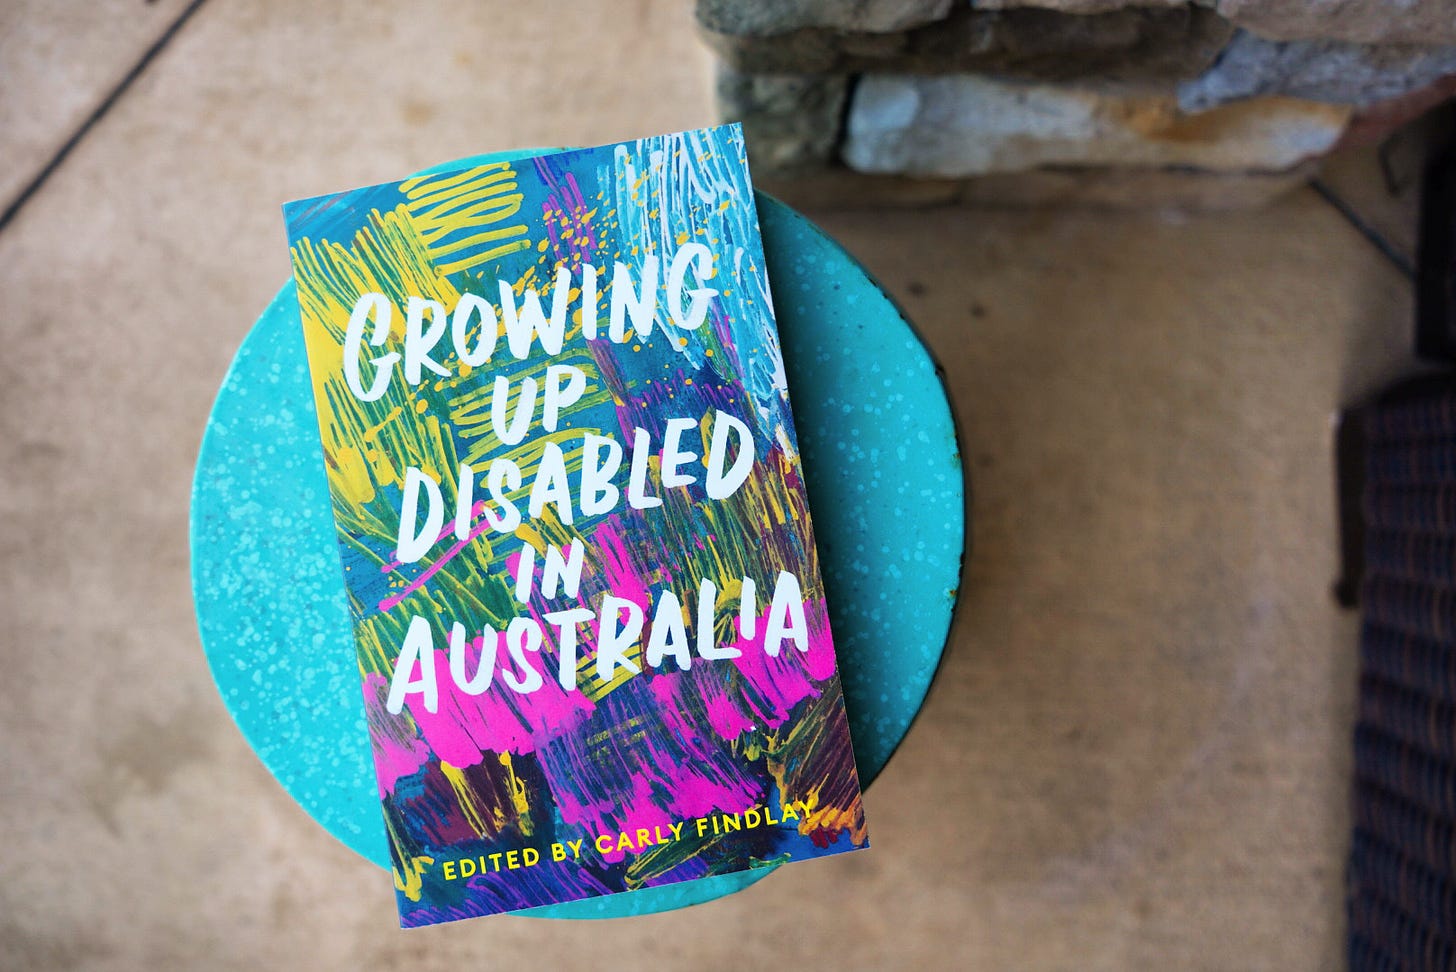 a photo of the book Growing Up Disabled in Australia sitting on a blue side table